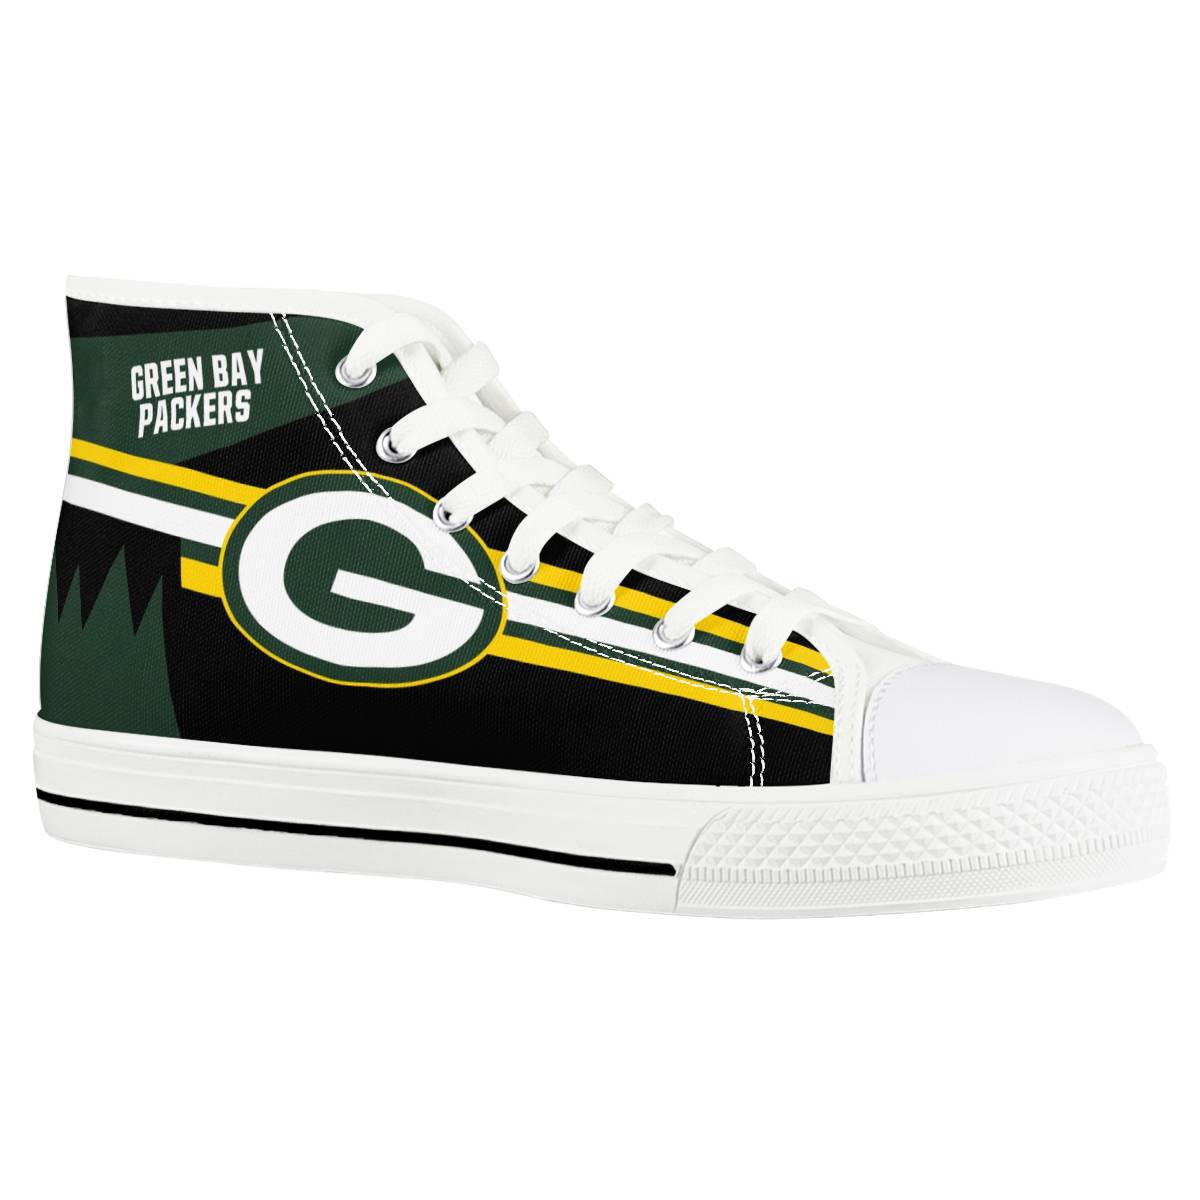 Women's Green Bay Packers High Top Canvas Sneakers 006